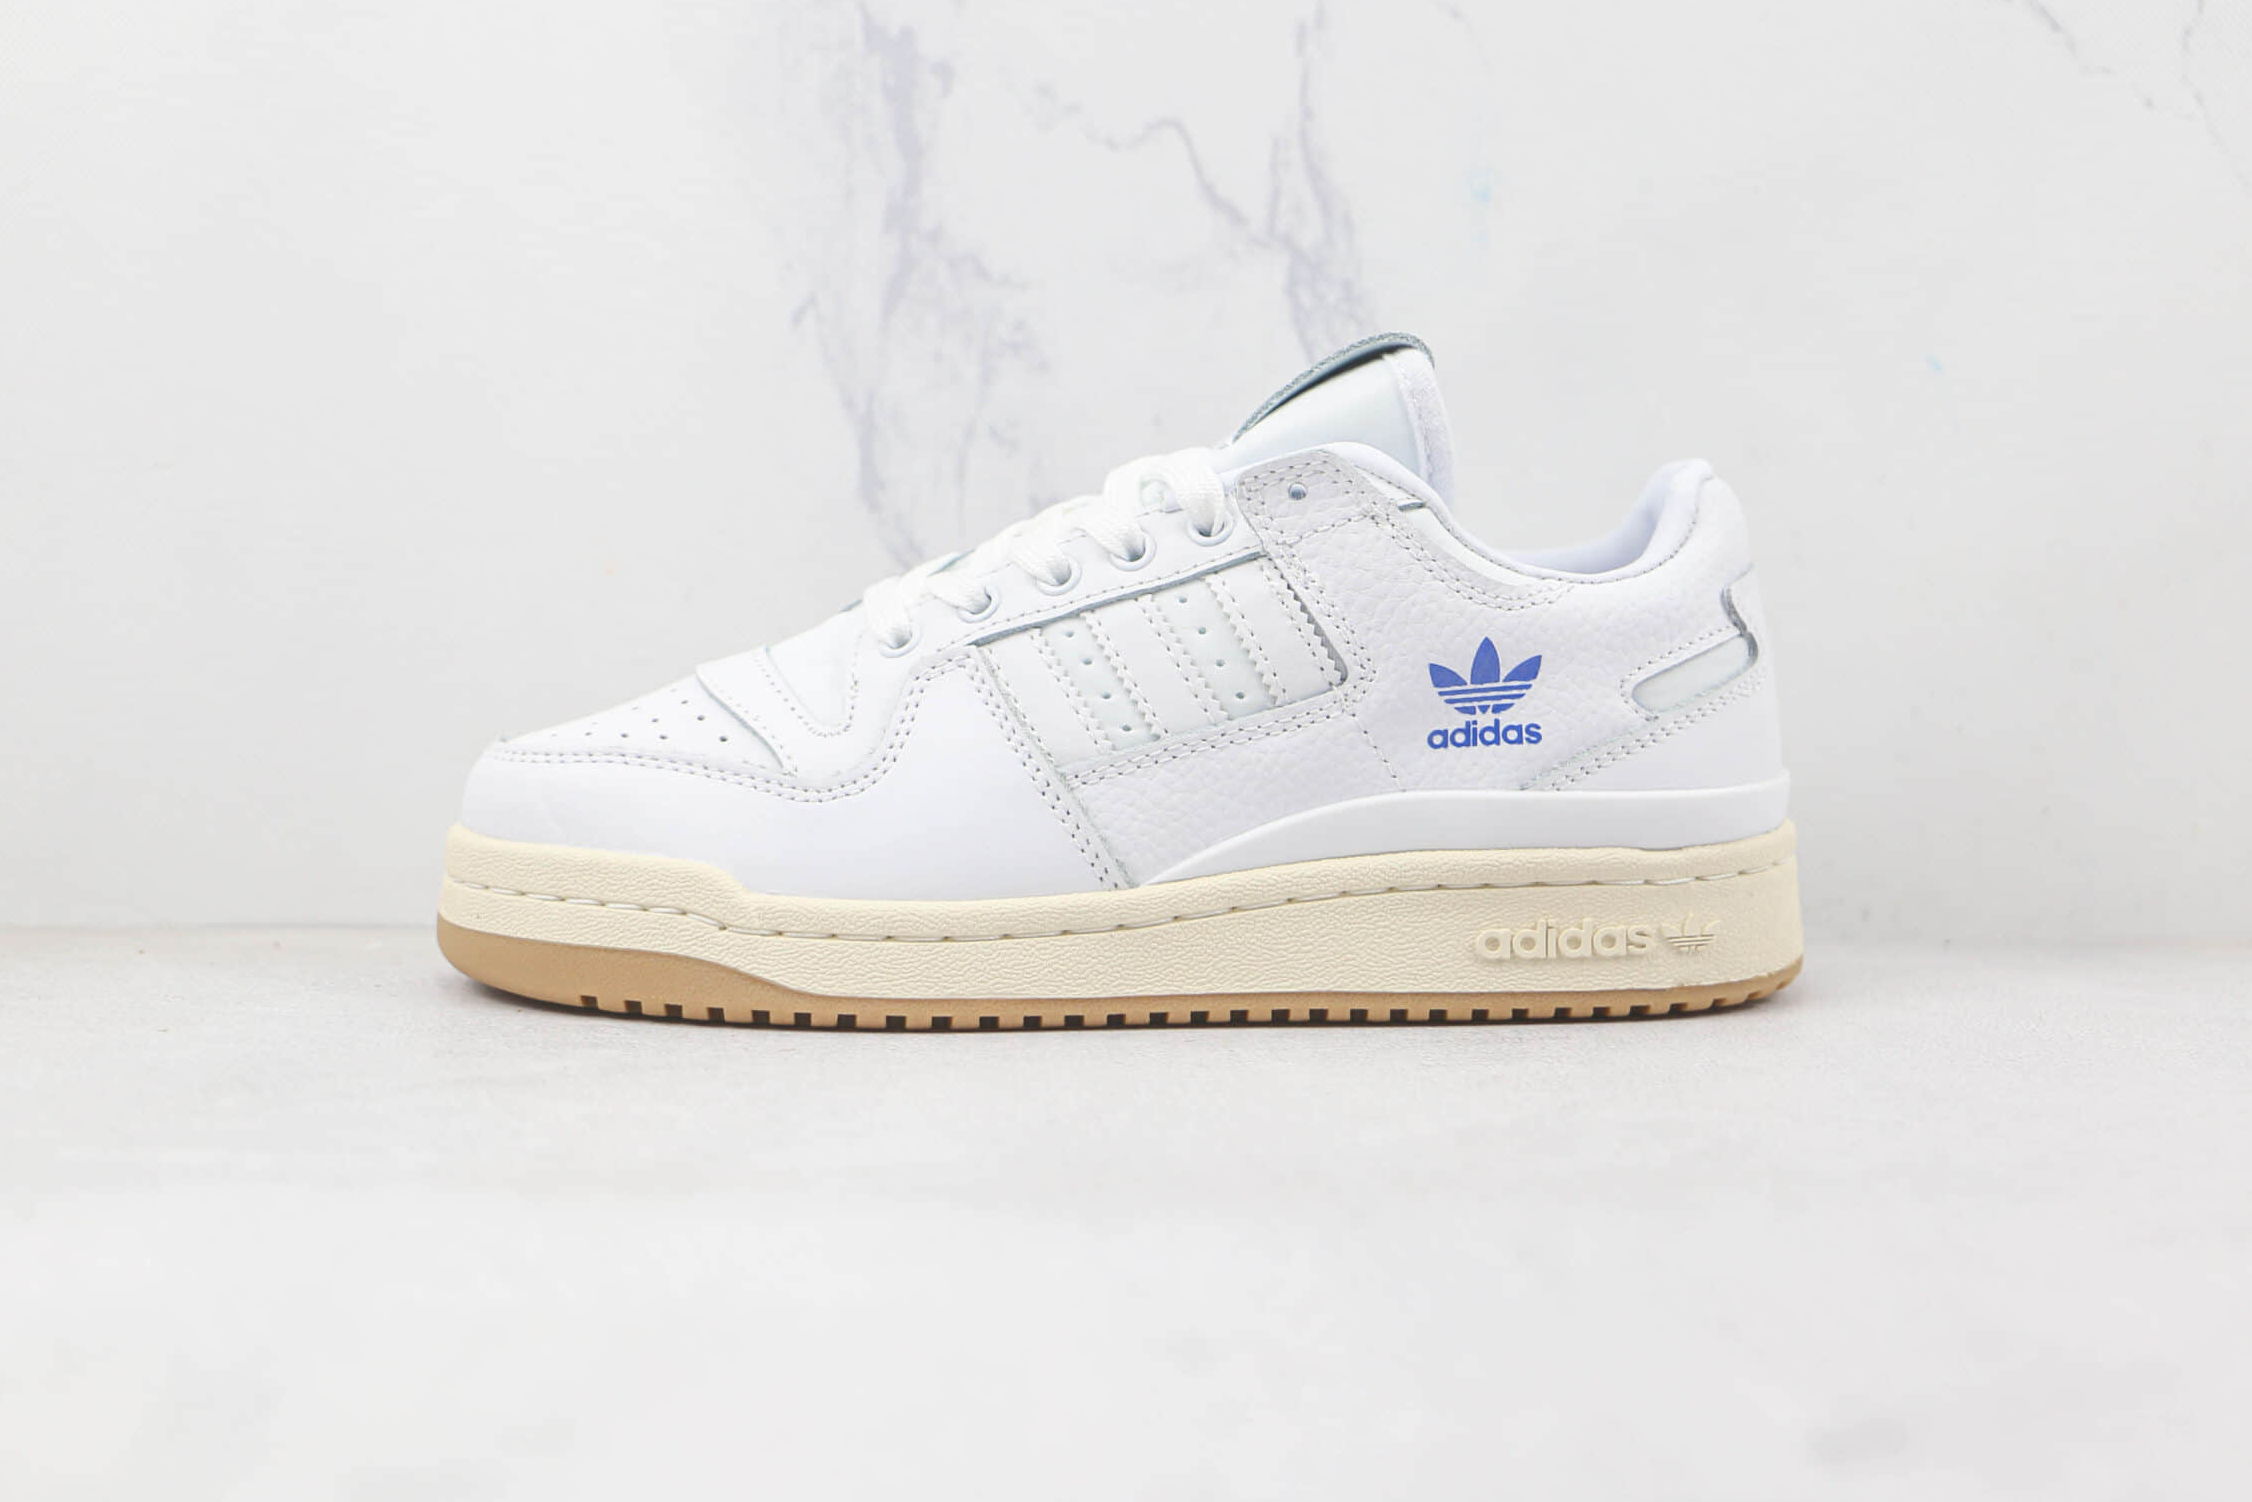 Adidas Forum 84 'White Blue Bird' H04903 - Classic Style Sneakers